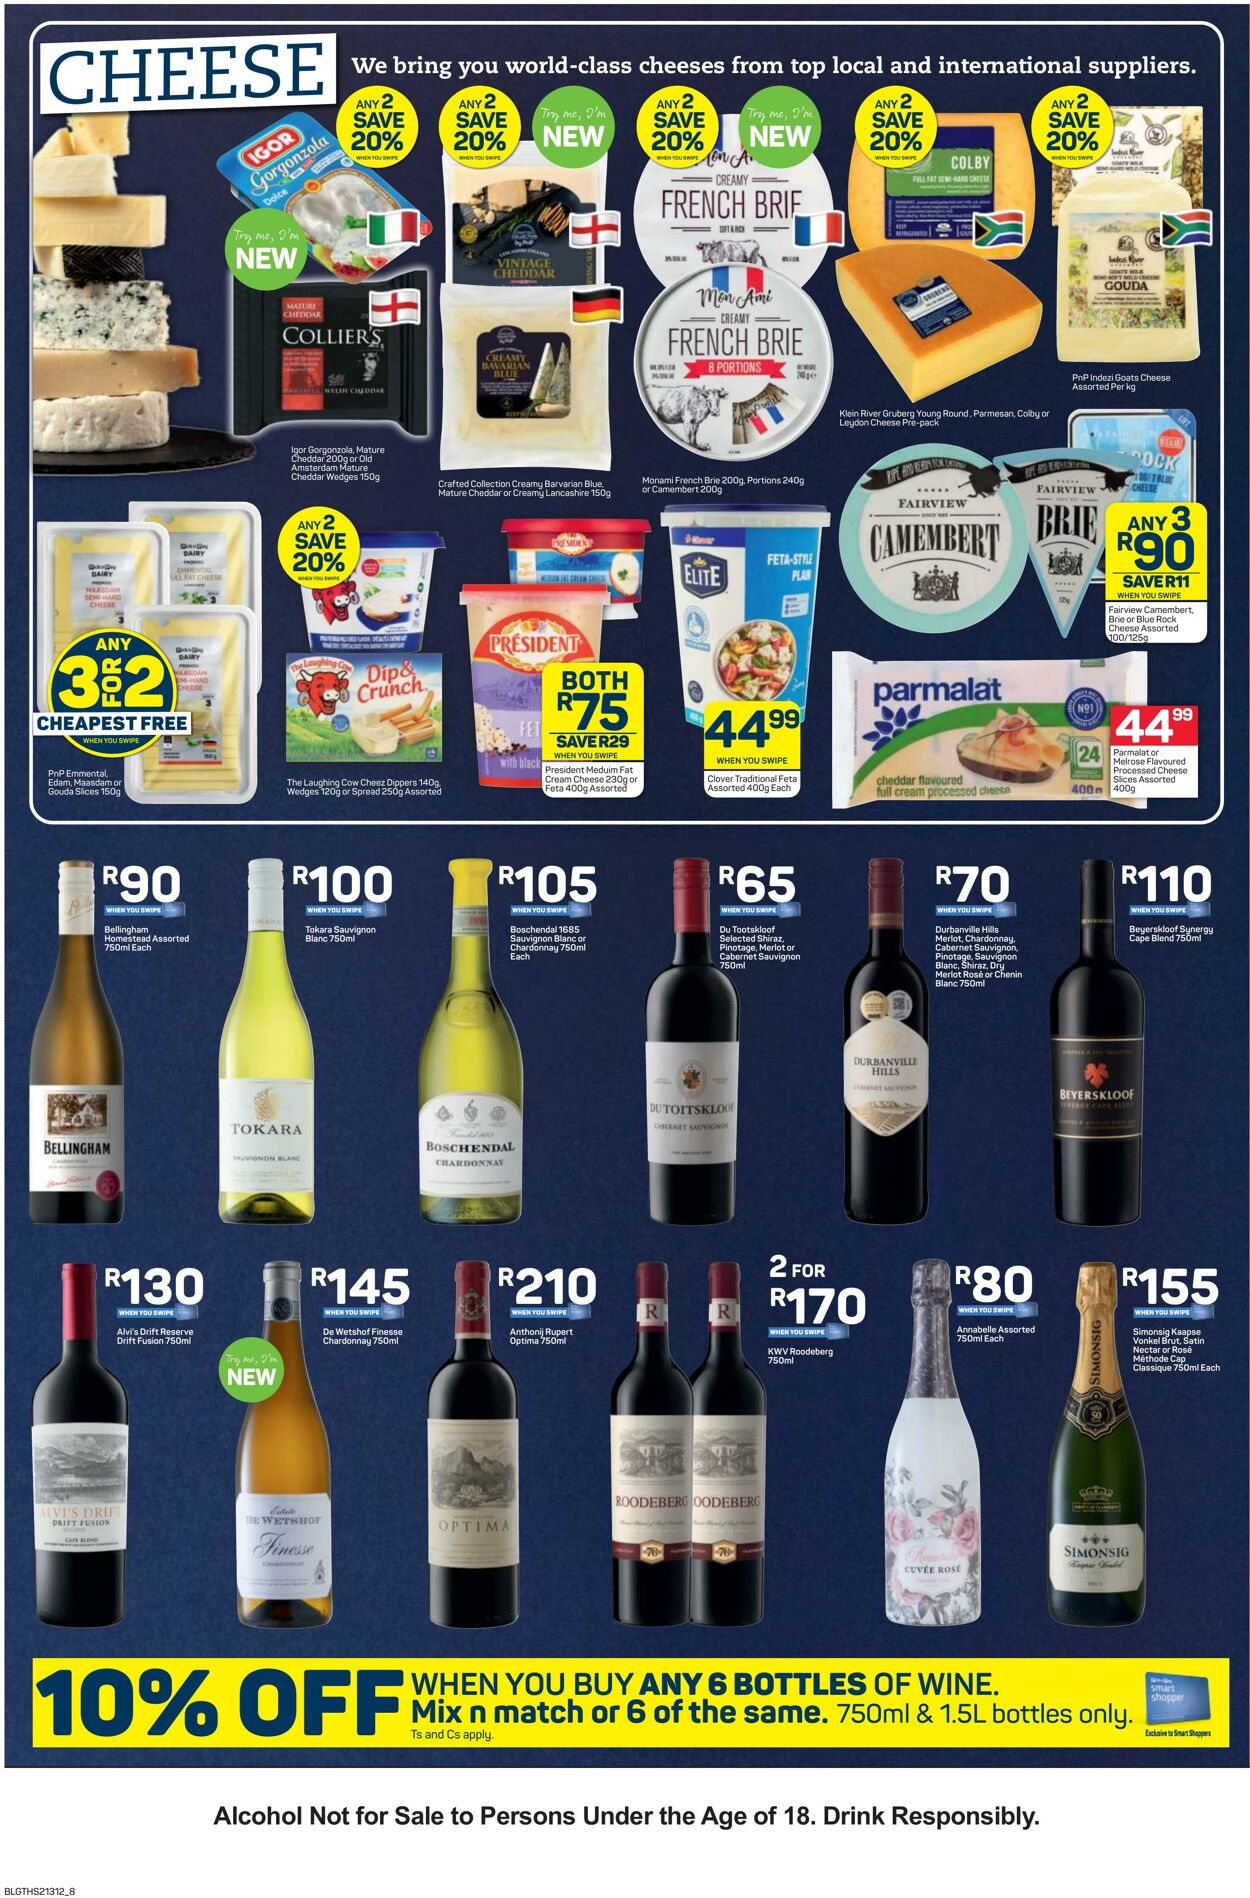 Special Pick n Pay 29.08.2022 - 11.09.2022